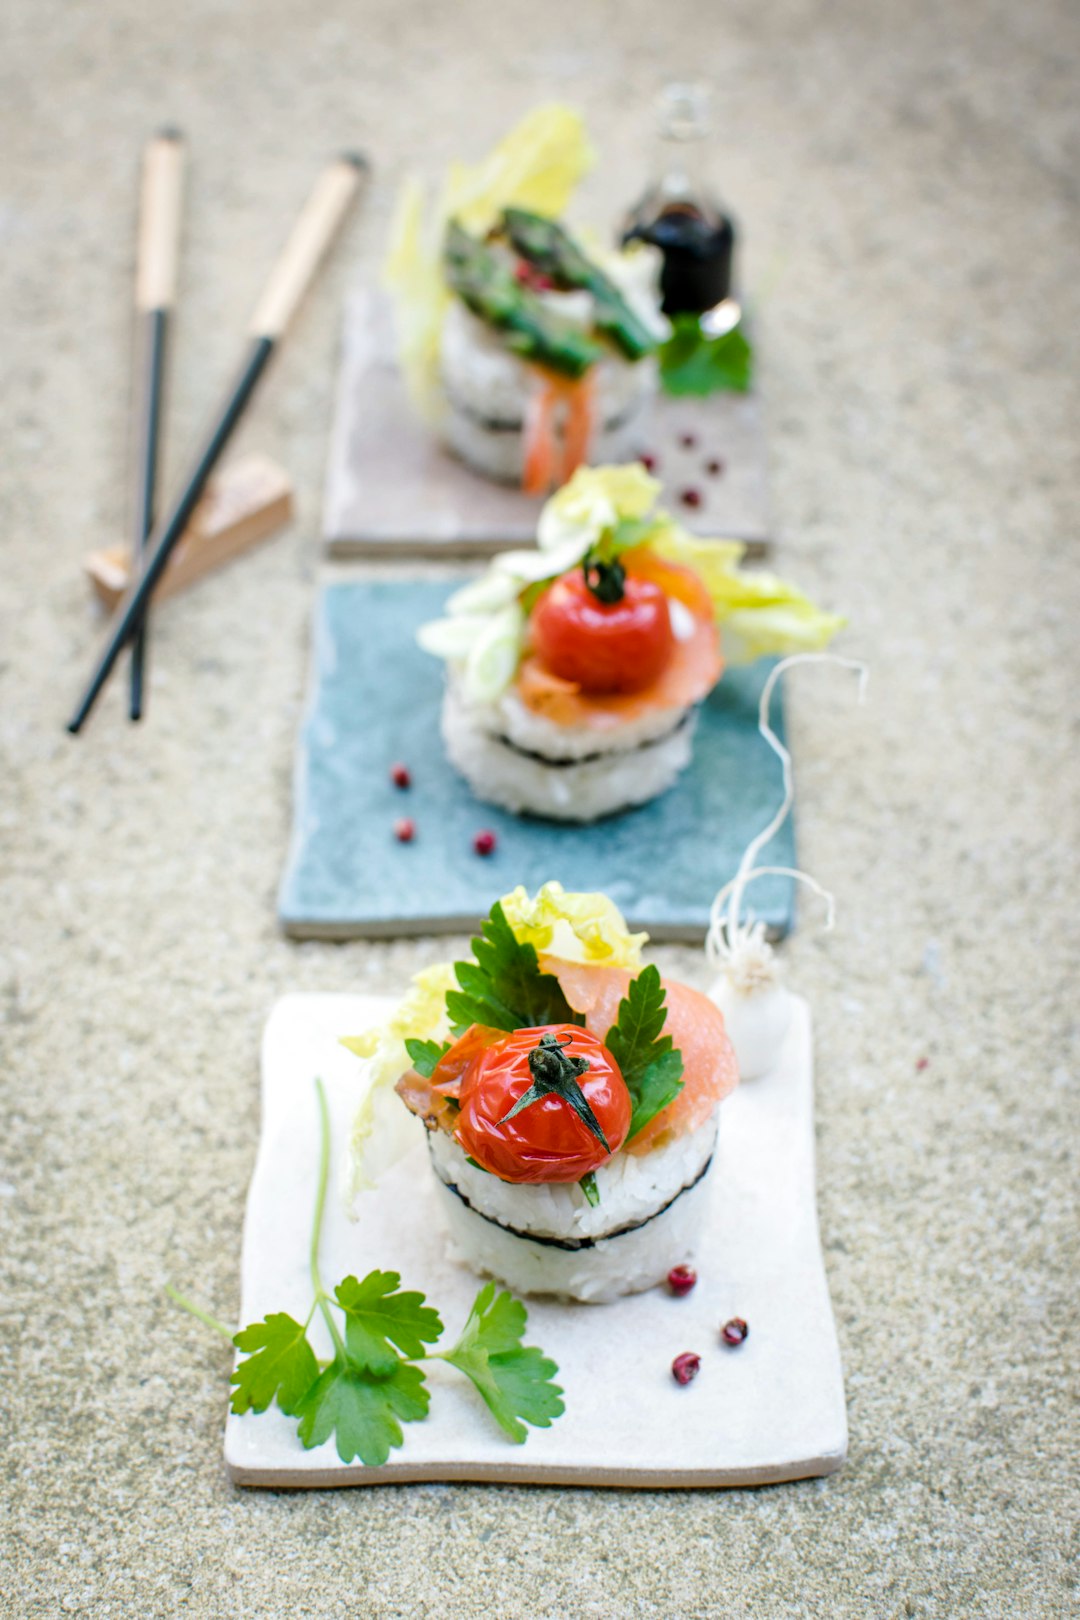 sushi catering